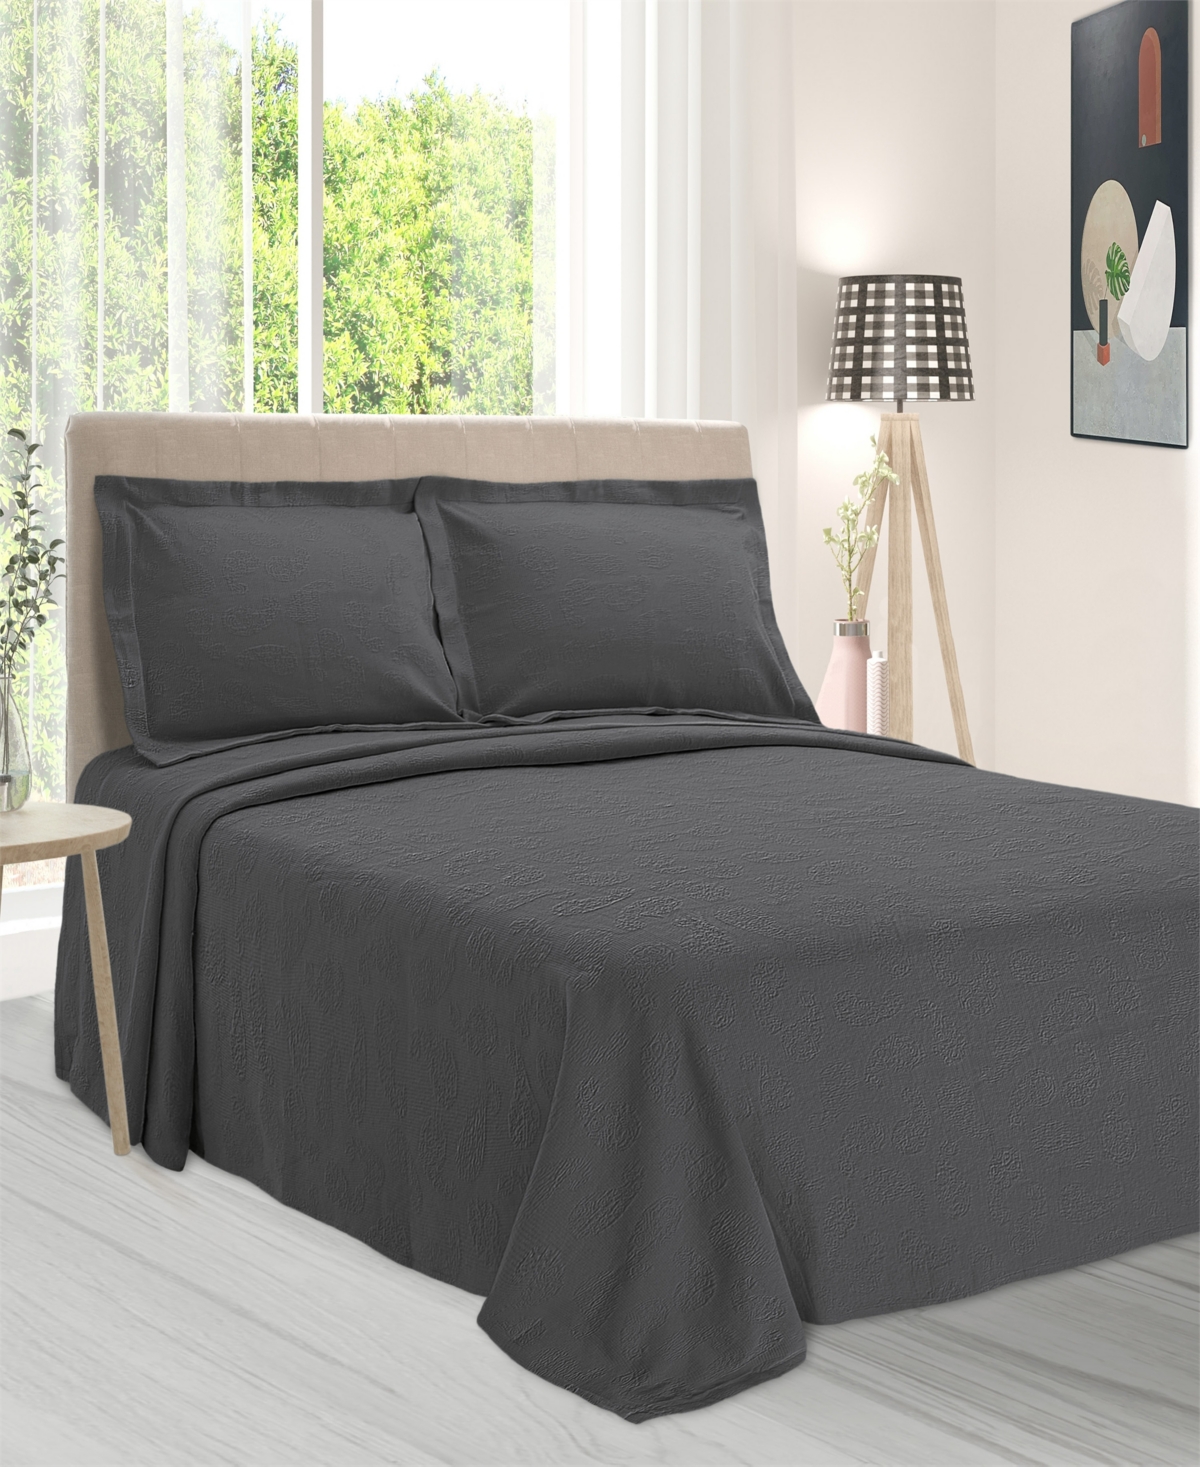 Superior 100% Cotton Paisley Matelasse All-season 3-piece Coverlet Set, Full In Charcoal